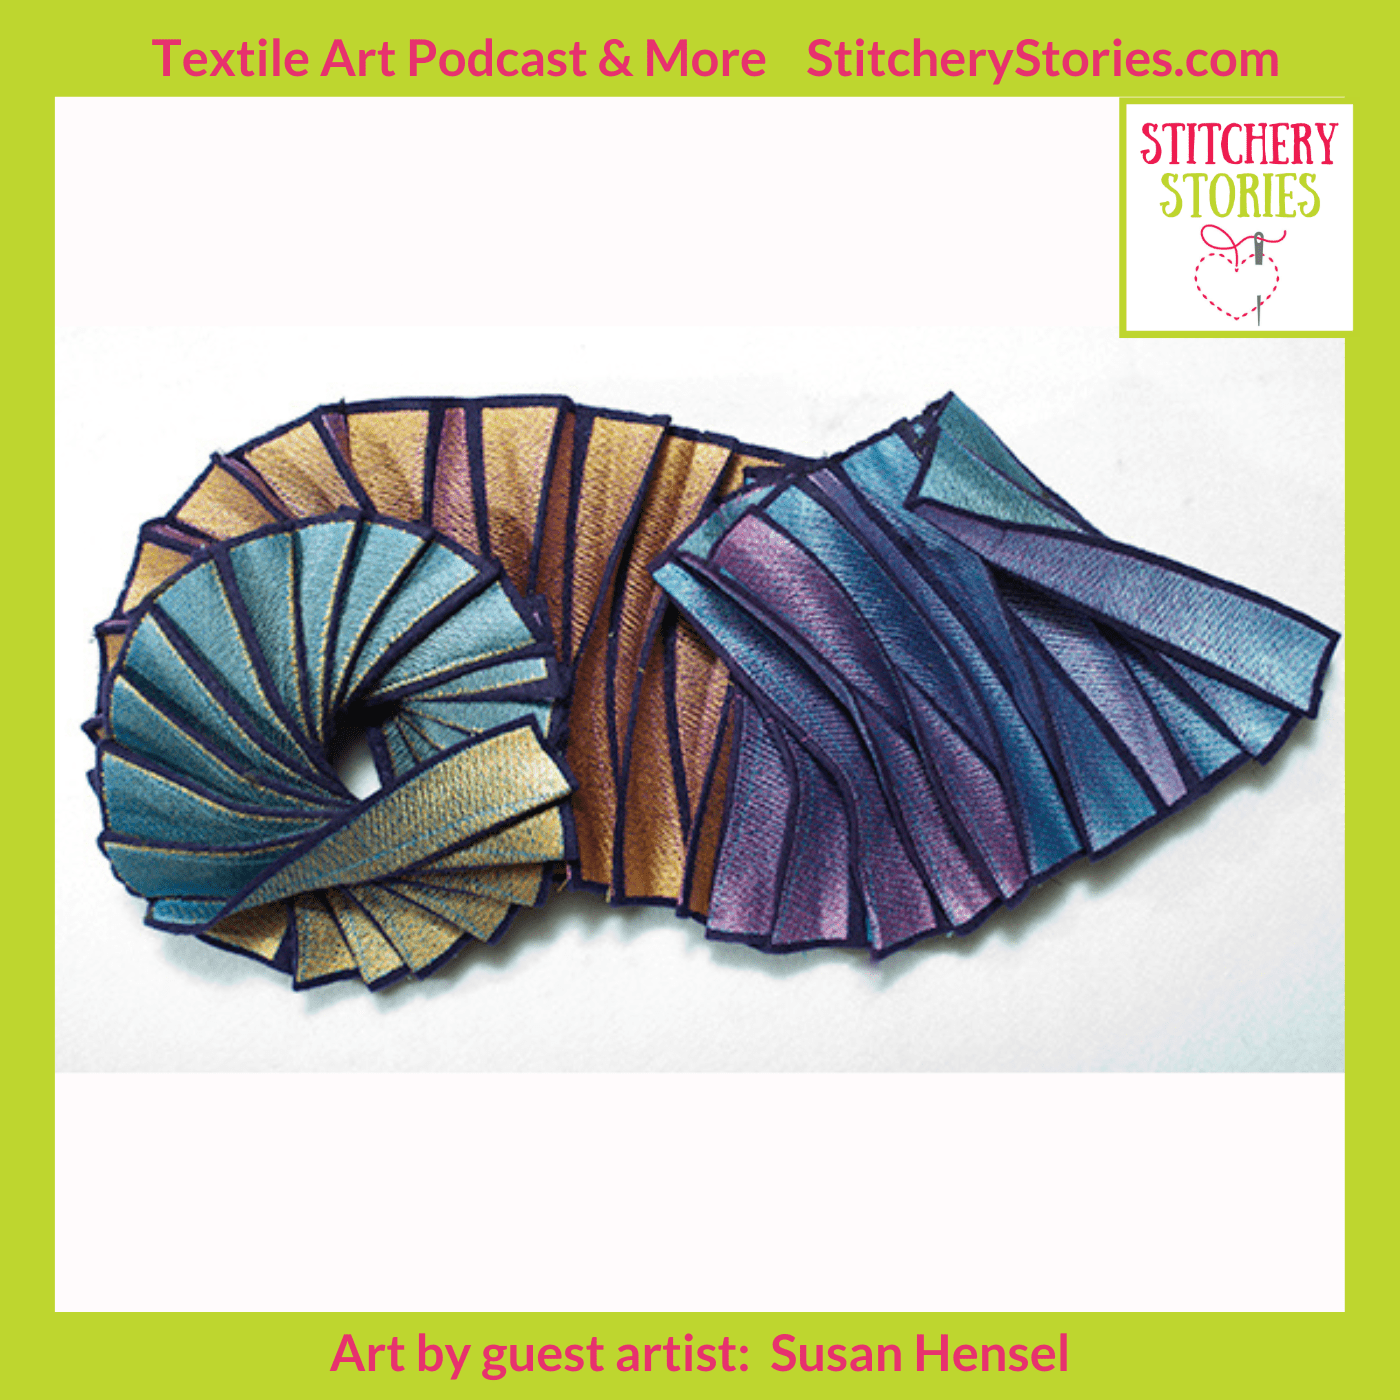 Chromatic wave 2 by susan hensel Stitchery Stories podcast